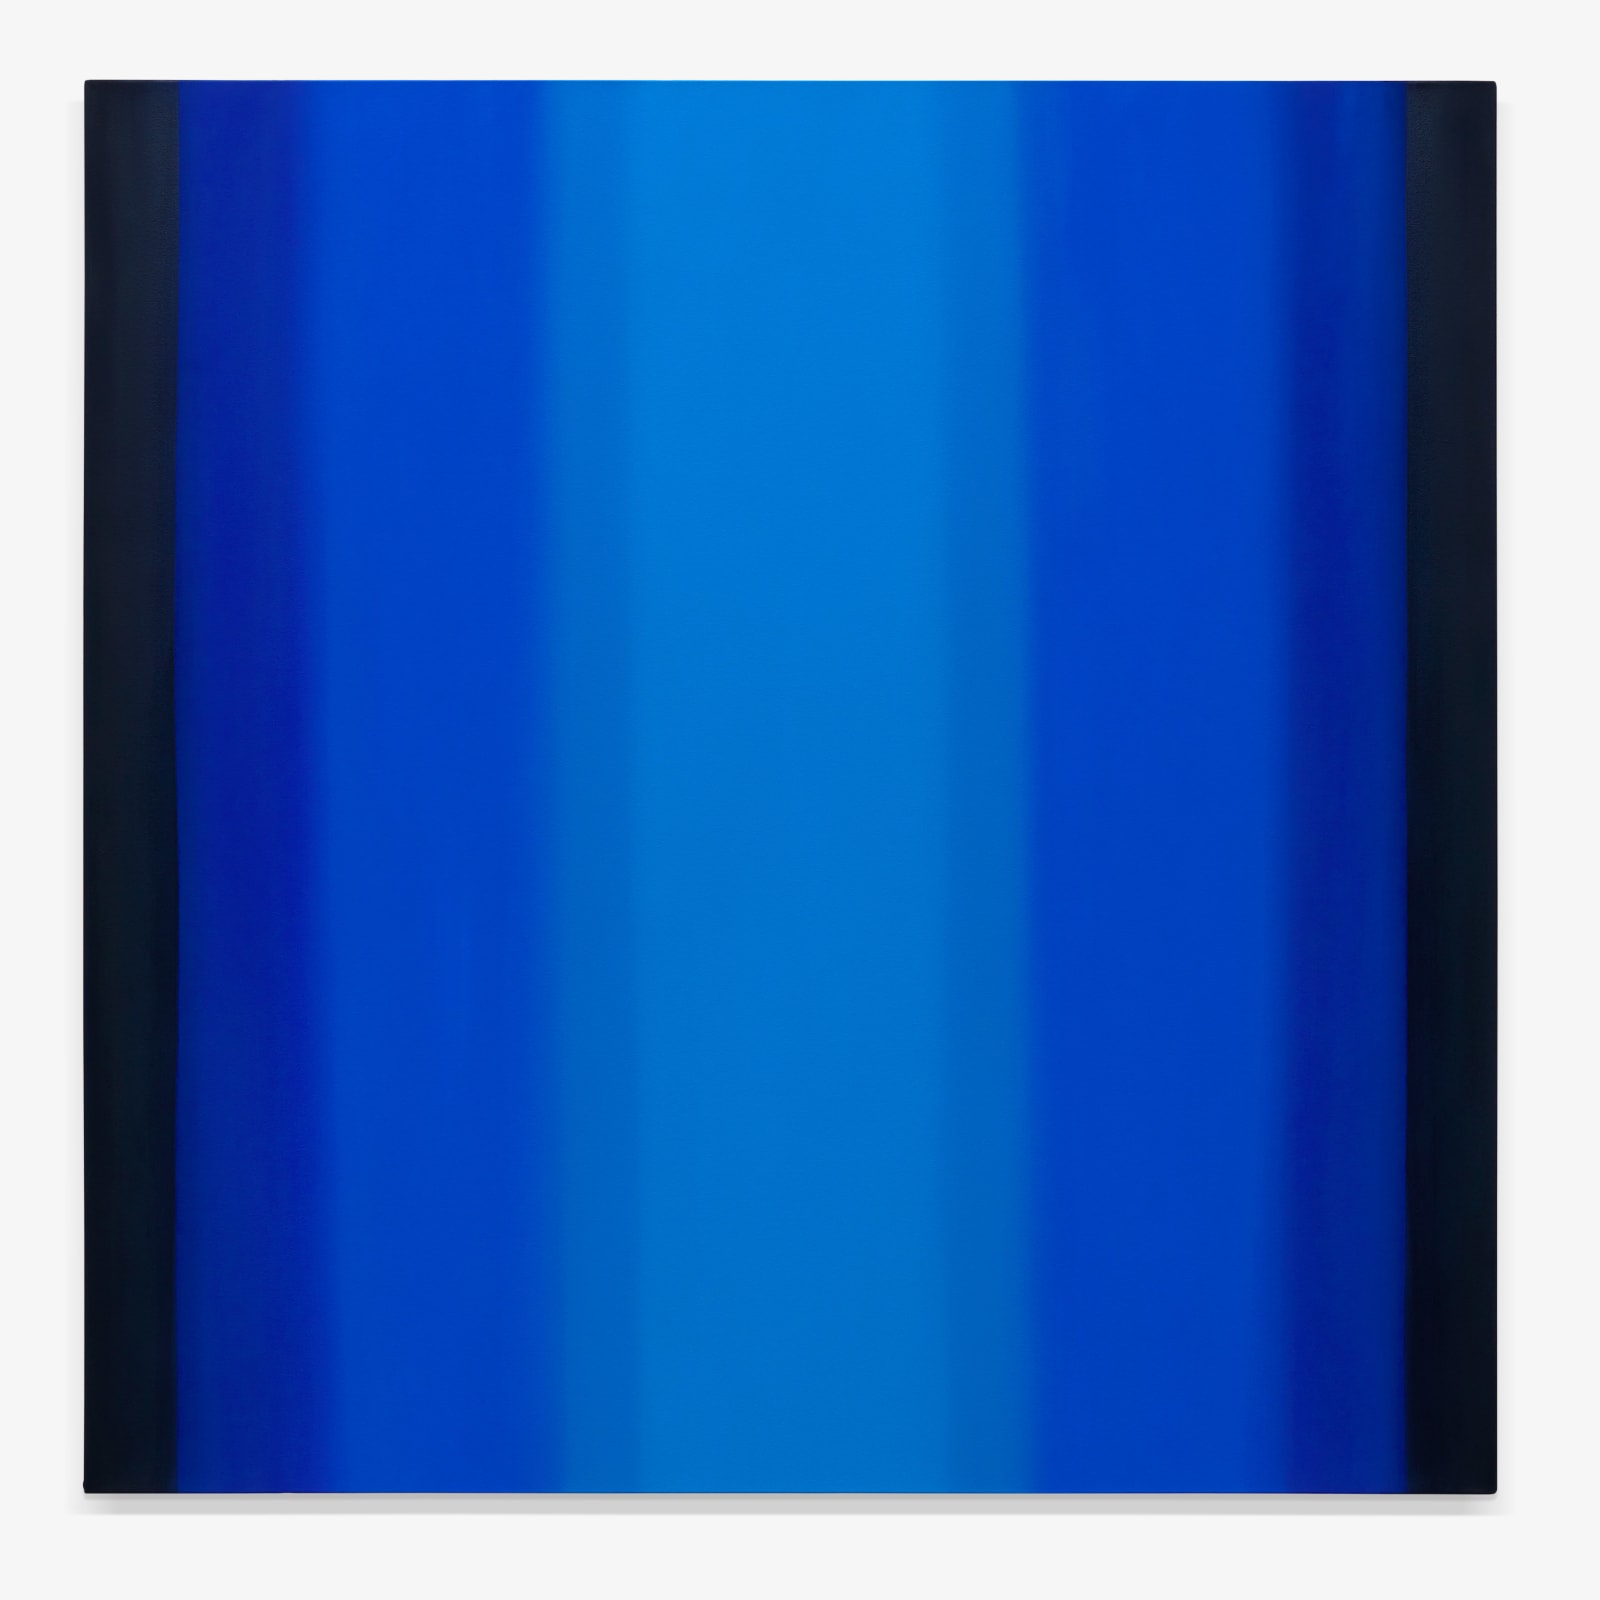 Ruth Pastine, Blue Light 1, Sequence Series, 2018